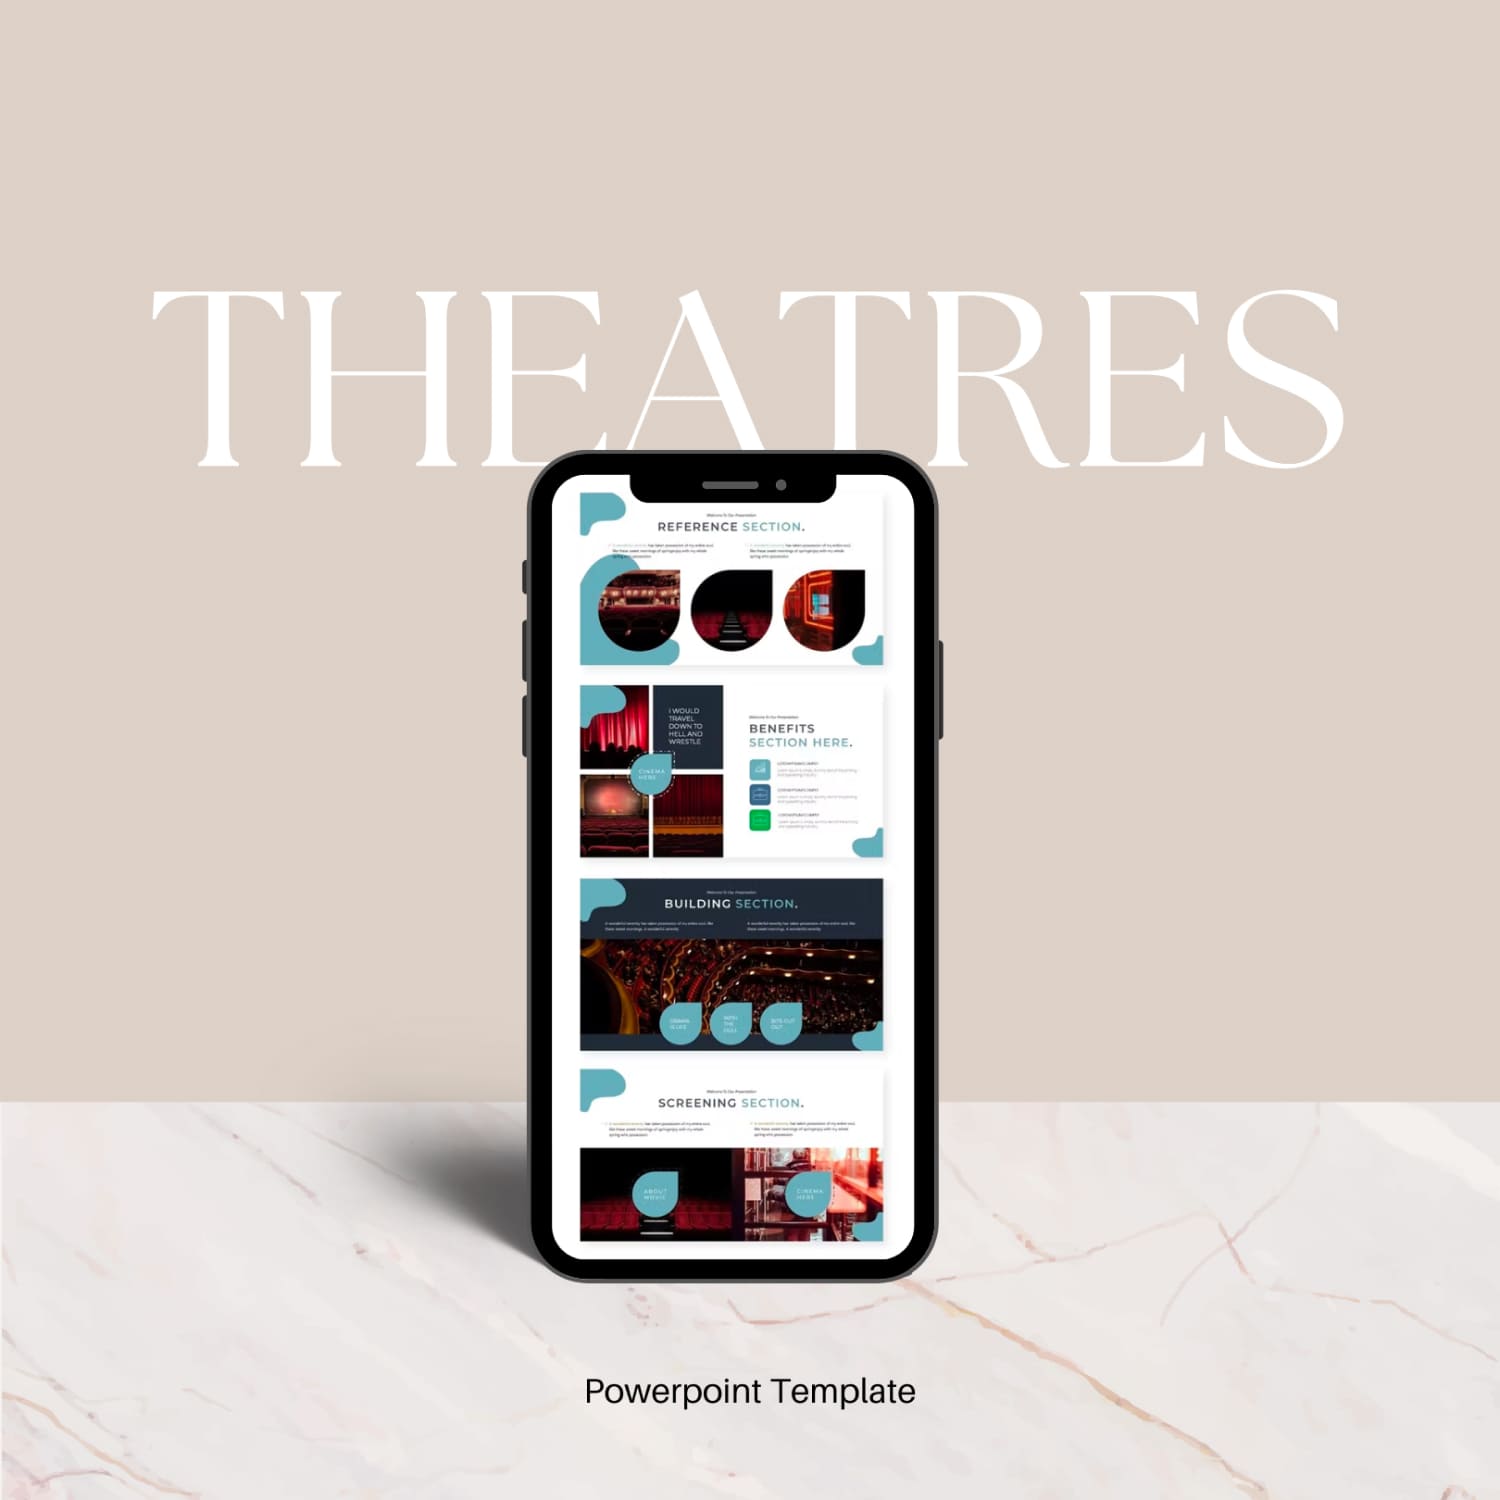 Theaters | Powerpoint Template.